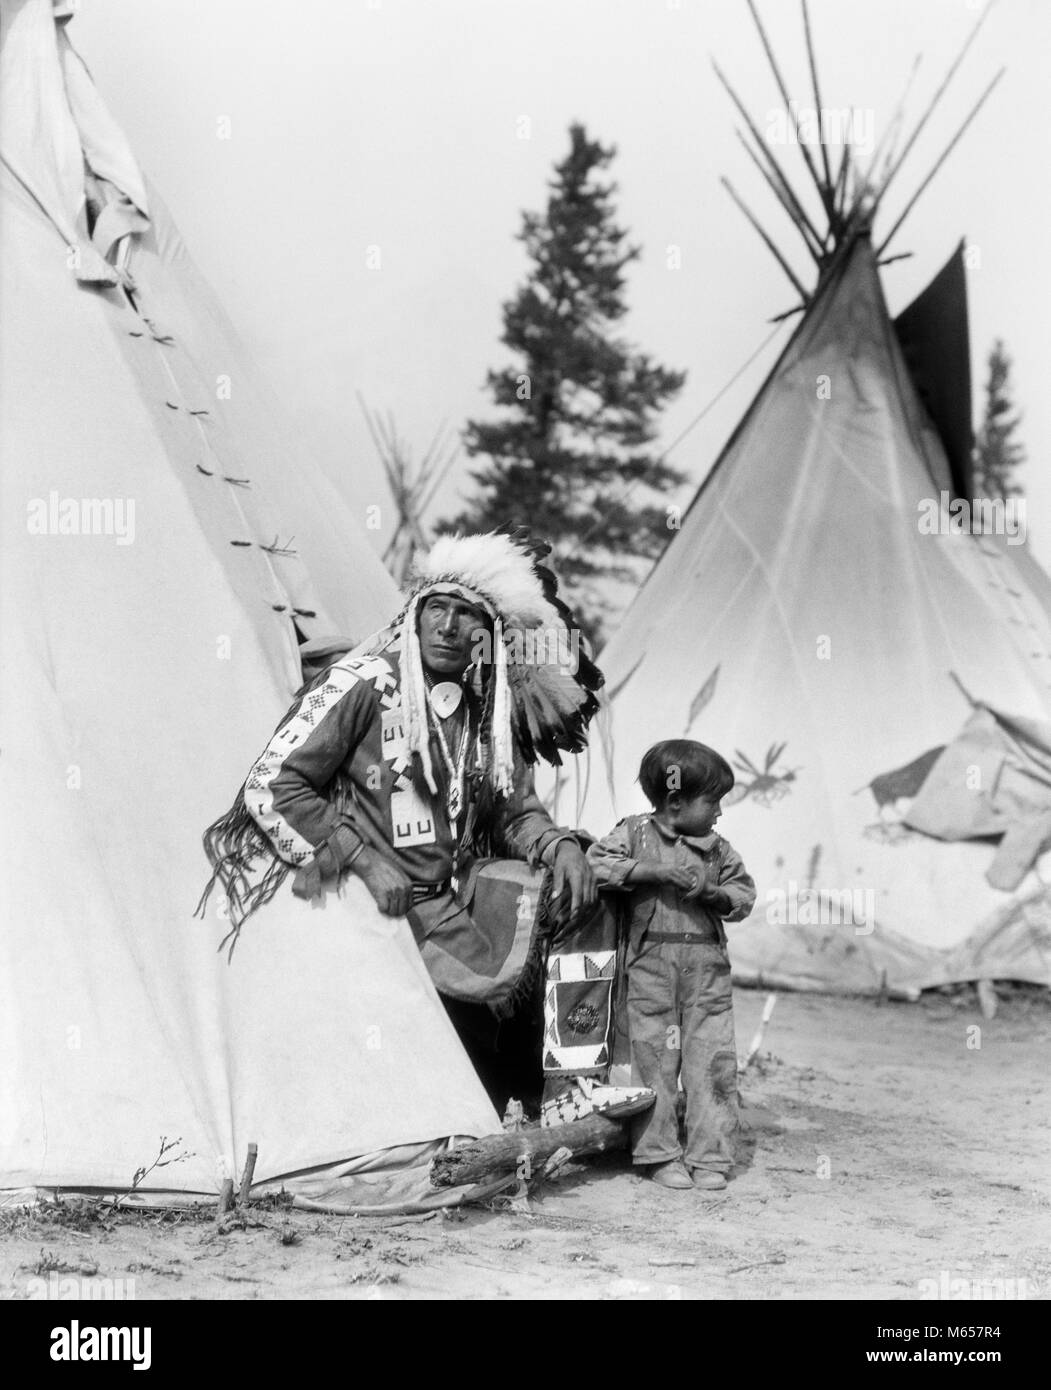 1920s NATIVE AMERICAN INDIAN MAN CHIEF SITTING EAGLE AND BOY IN ENTRANCE TO TEPEE STONEY TRIBE OF BANFF ALBERTA CANADA - i525 HAR001 HARS RURAL HOME LIFE EAGLE COPY SPACE FRIENDSHIP HALF-LENGTH VILLAGE INDIANS NOSTALGIA FATHERS MIDDLE-AGED NORTH AMERICA TOGETHERNESS MIDDLE-AGED MAN 3-4 YEARS 45-50 YEARS NORTH AMERICAN TEEPEE AND TIPI CANADIAN CHIEF DADS LEADERSHIP PRIDE GROWTH CONNECTION GRANDCHILD GRANDFATHERS TEPEE STONEY TRIBE GRANDSON NATIVE AMERICAN ALBERTA CONICAL JUVENILES MALES NATIVE AMERICANS WESTERN CANADA B&W BANFF BLACK AND WHITE GRANDPA INDIGENOUS OLD FASHIONED PERSONS Stock Photo